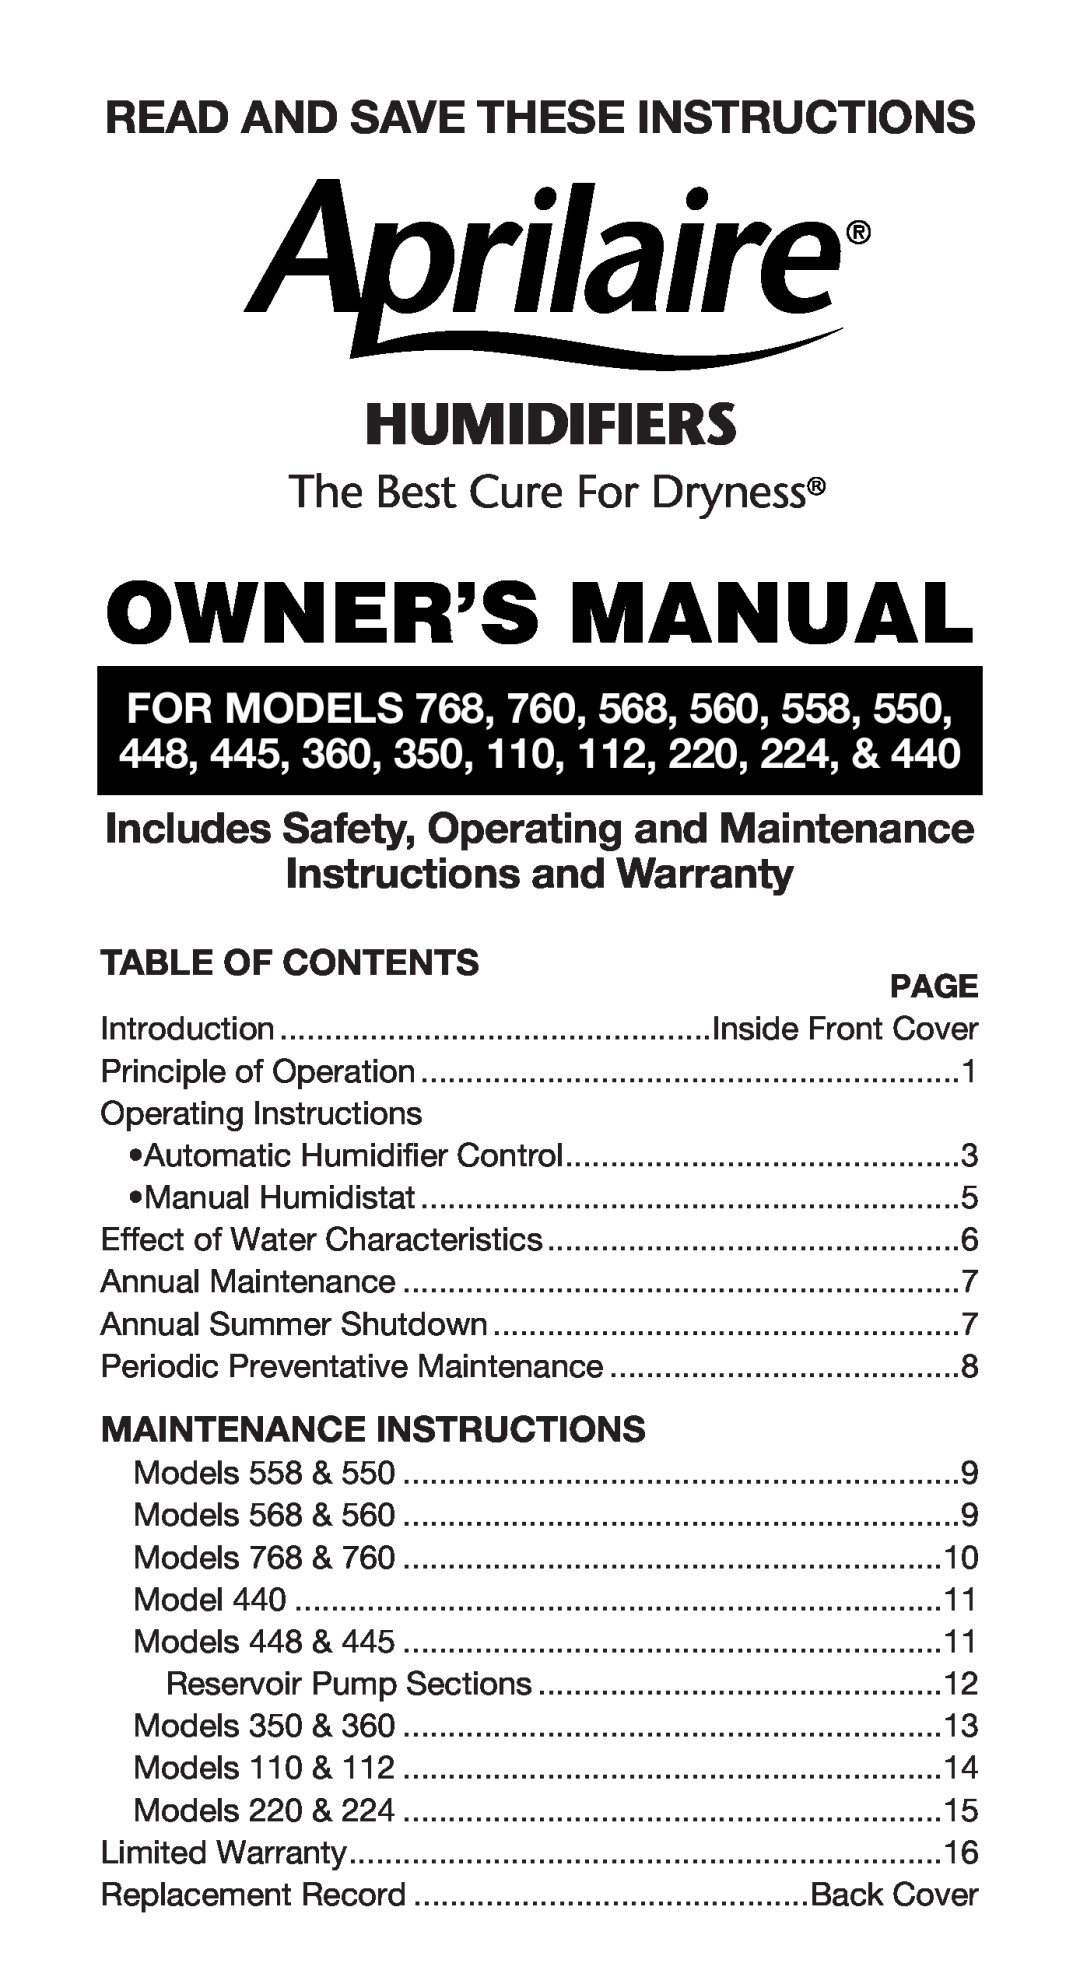 Aprilaire 360 owner manual Humidifiers, Read And Save These Instructions, The Best Cure For Dryness, Table Of Contents 